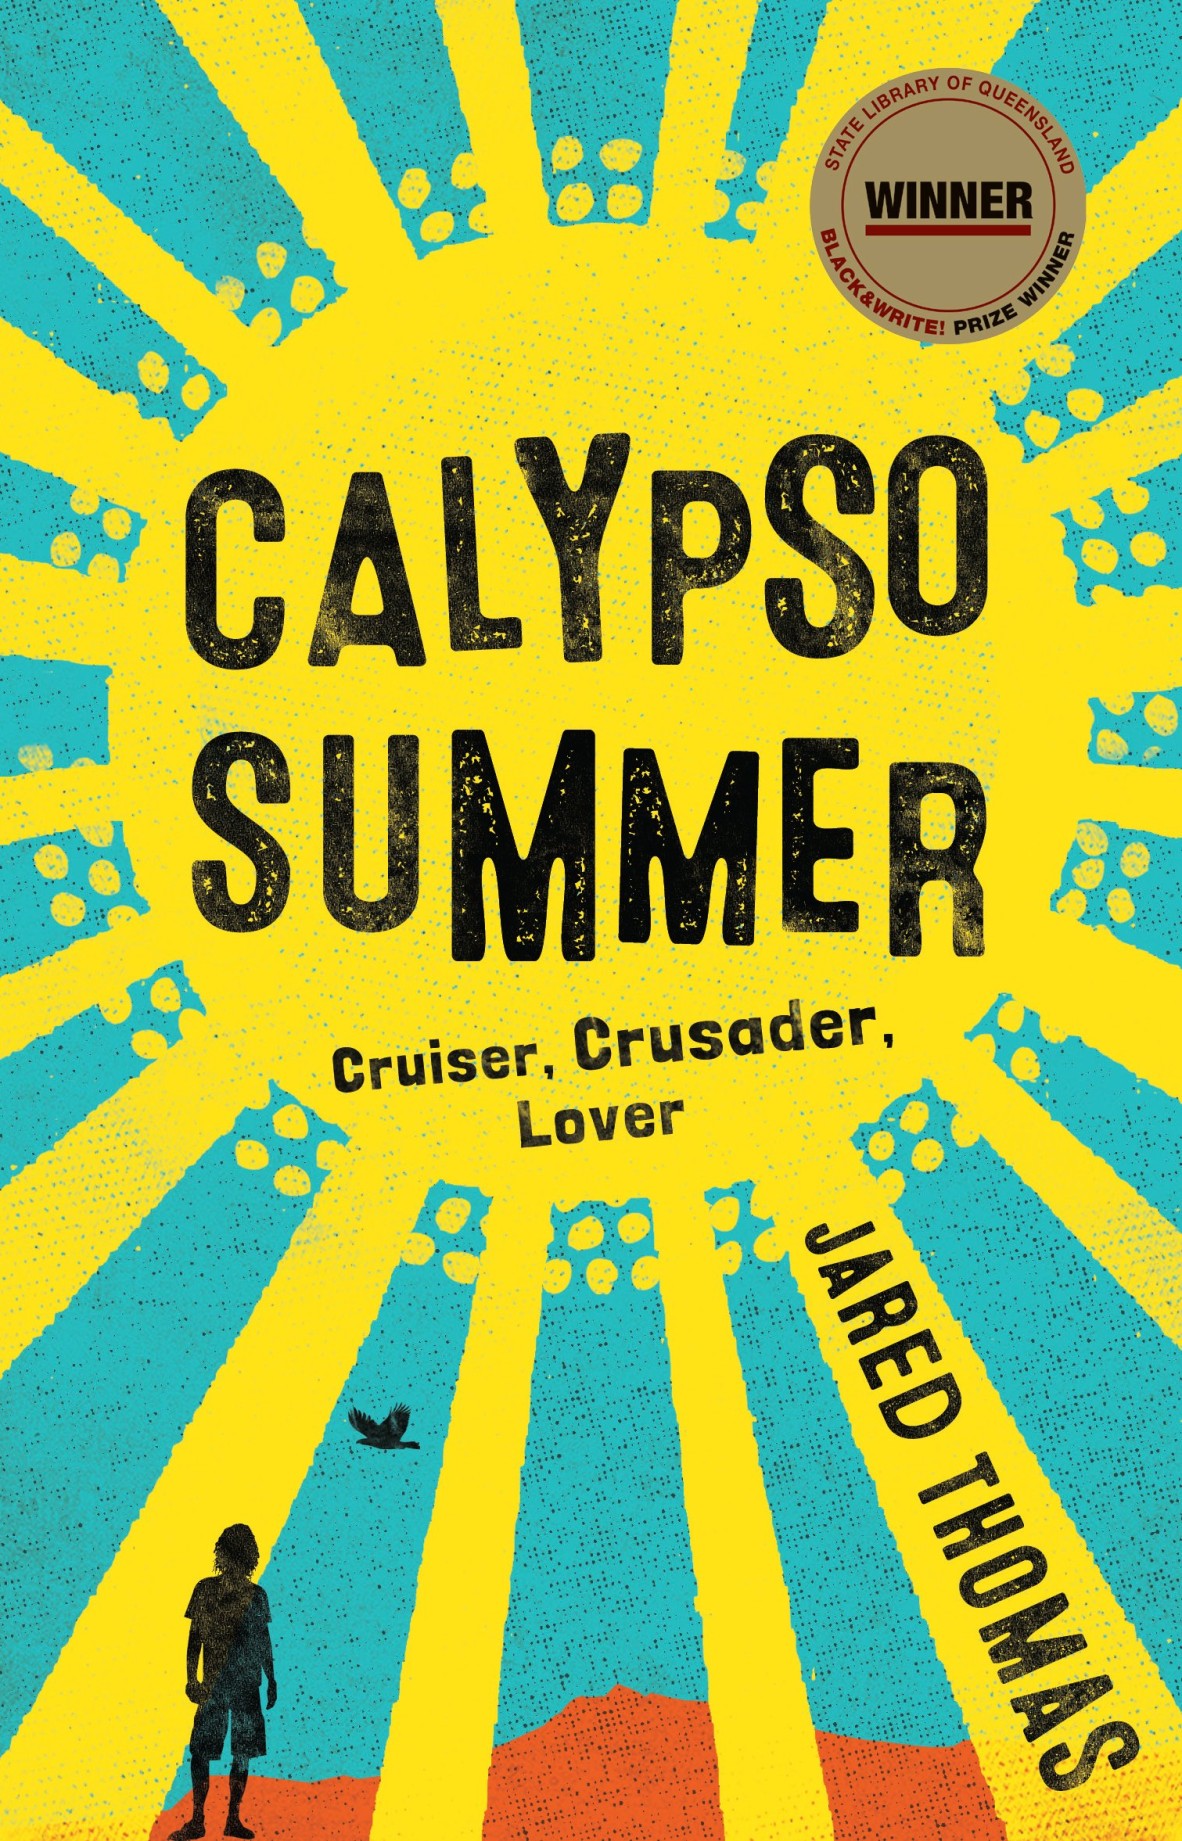 Book cover showing a yellow sun with a silhouette of a young man and a bird The text reads Calypso Summer Cruiser Crusader Lover By Jared Thomas 